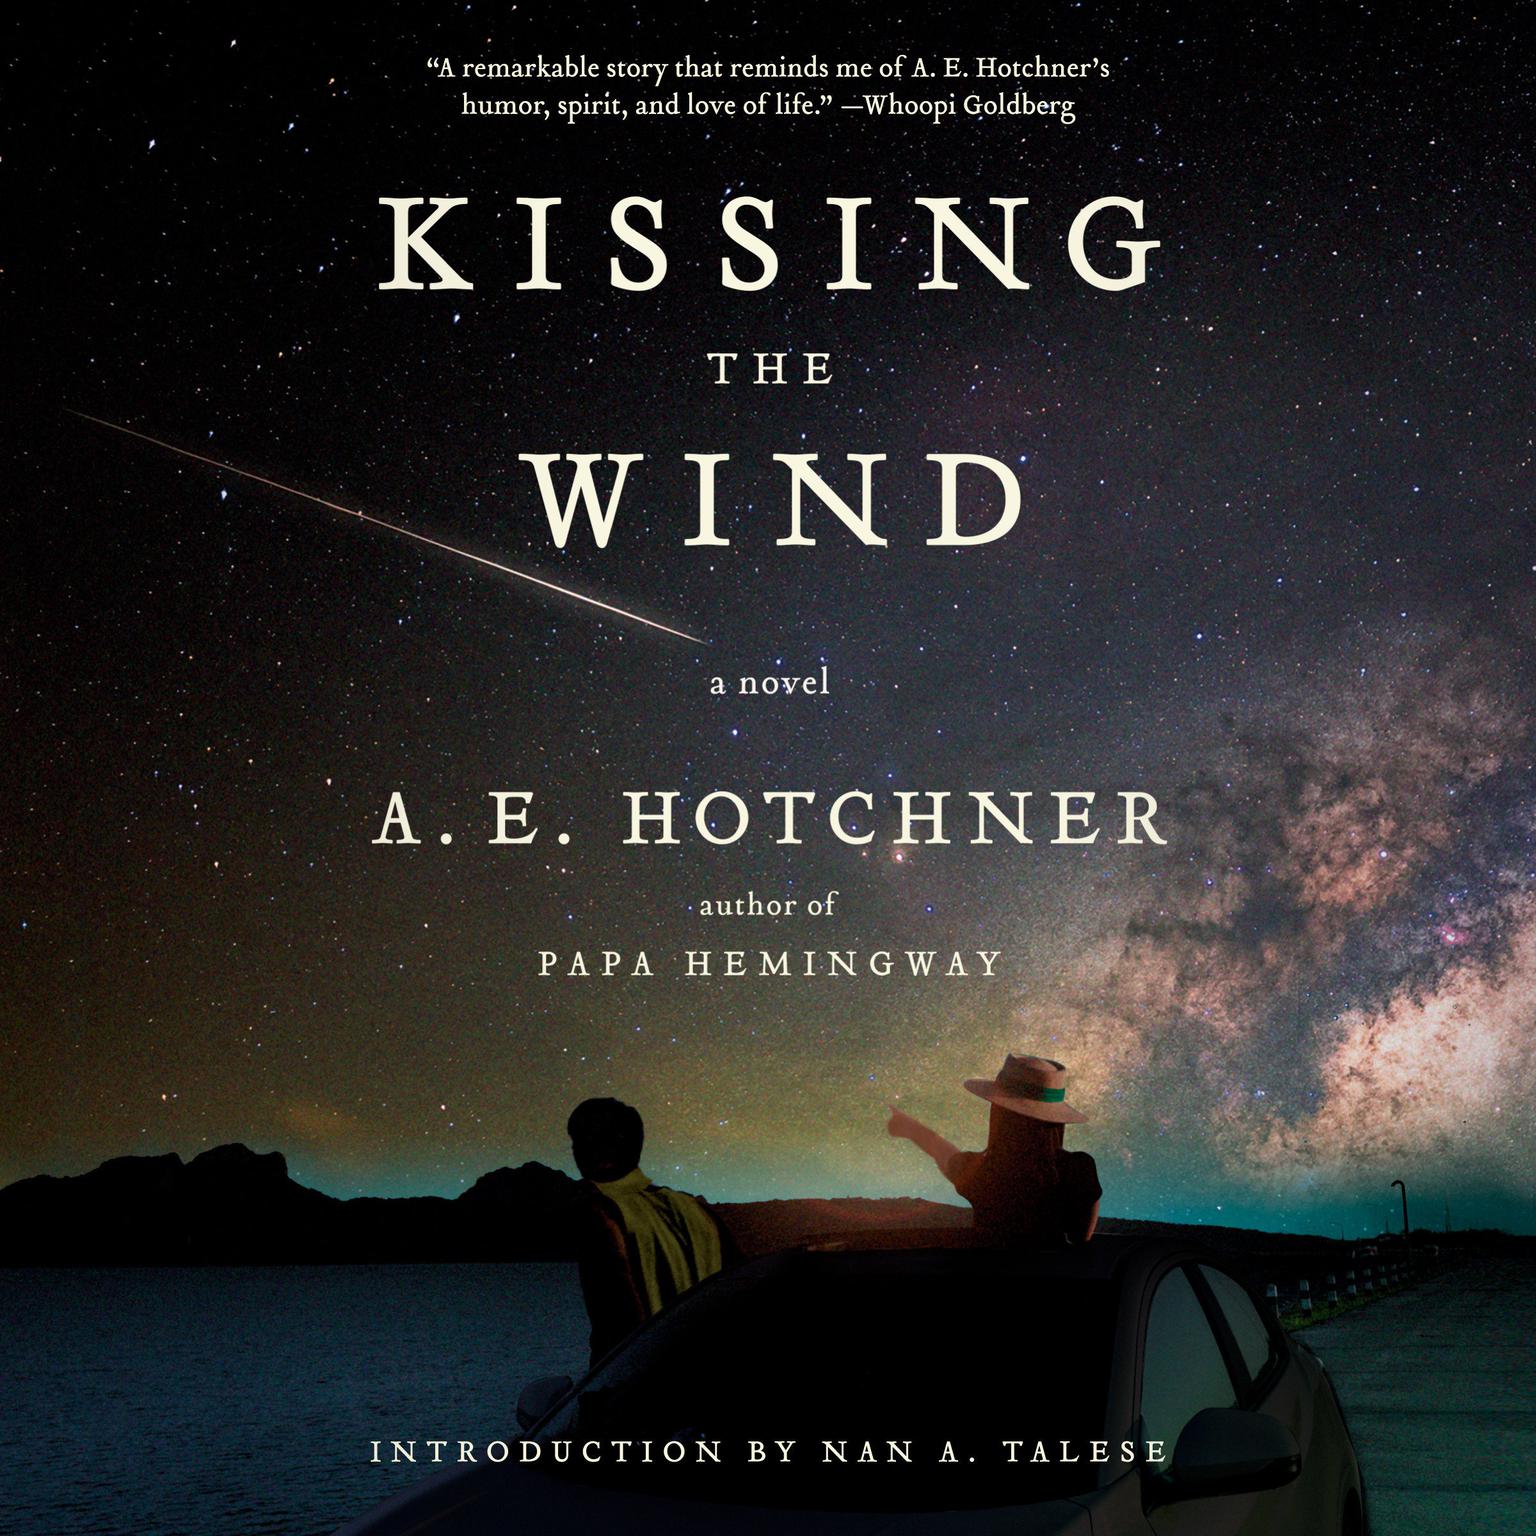 Kissing the Wind Audiobook, by A. E. Hotchner